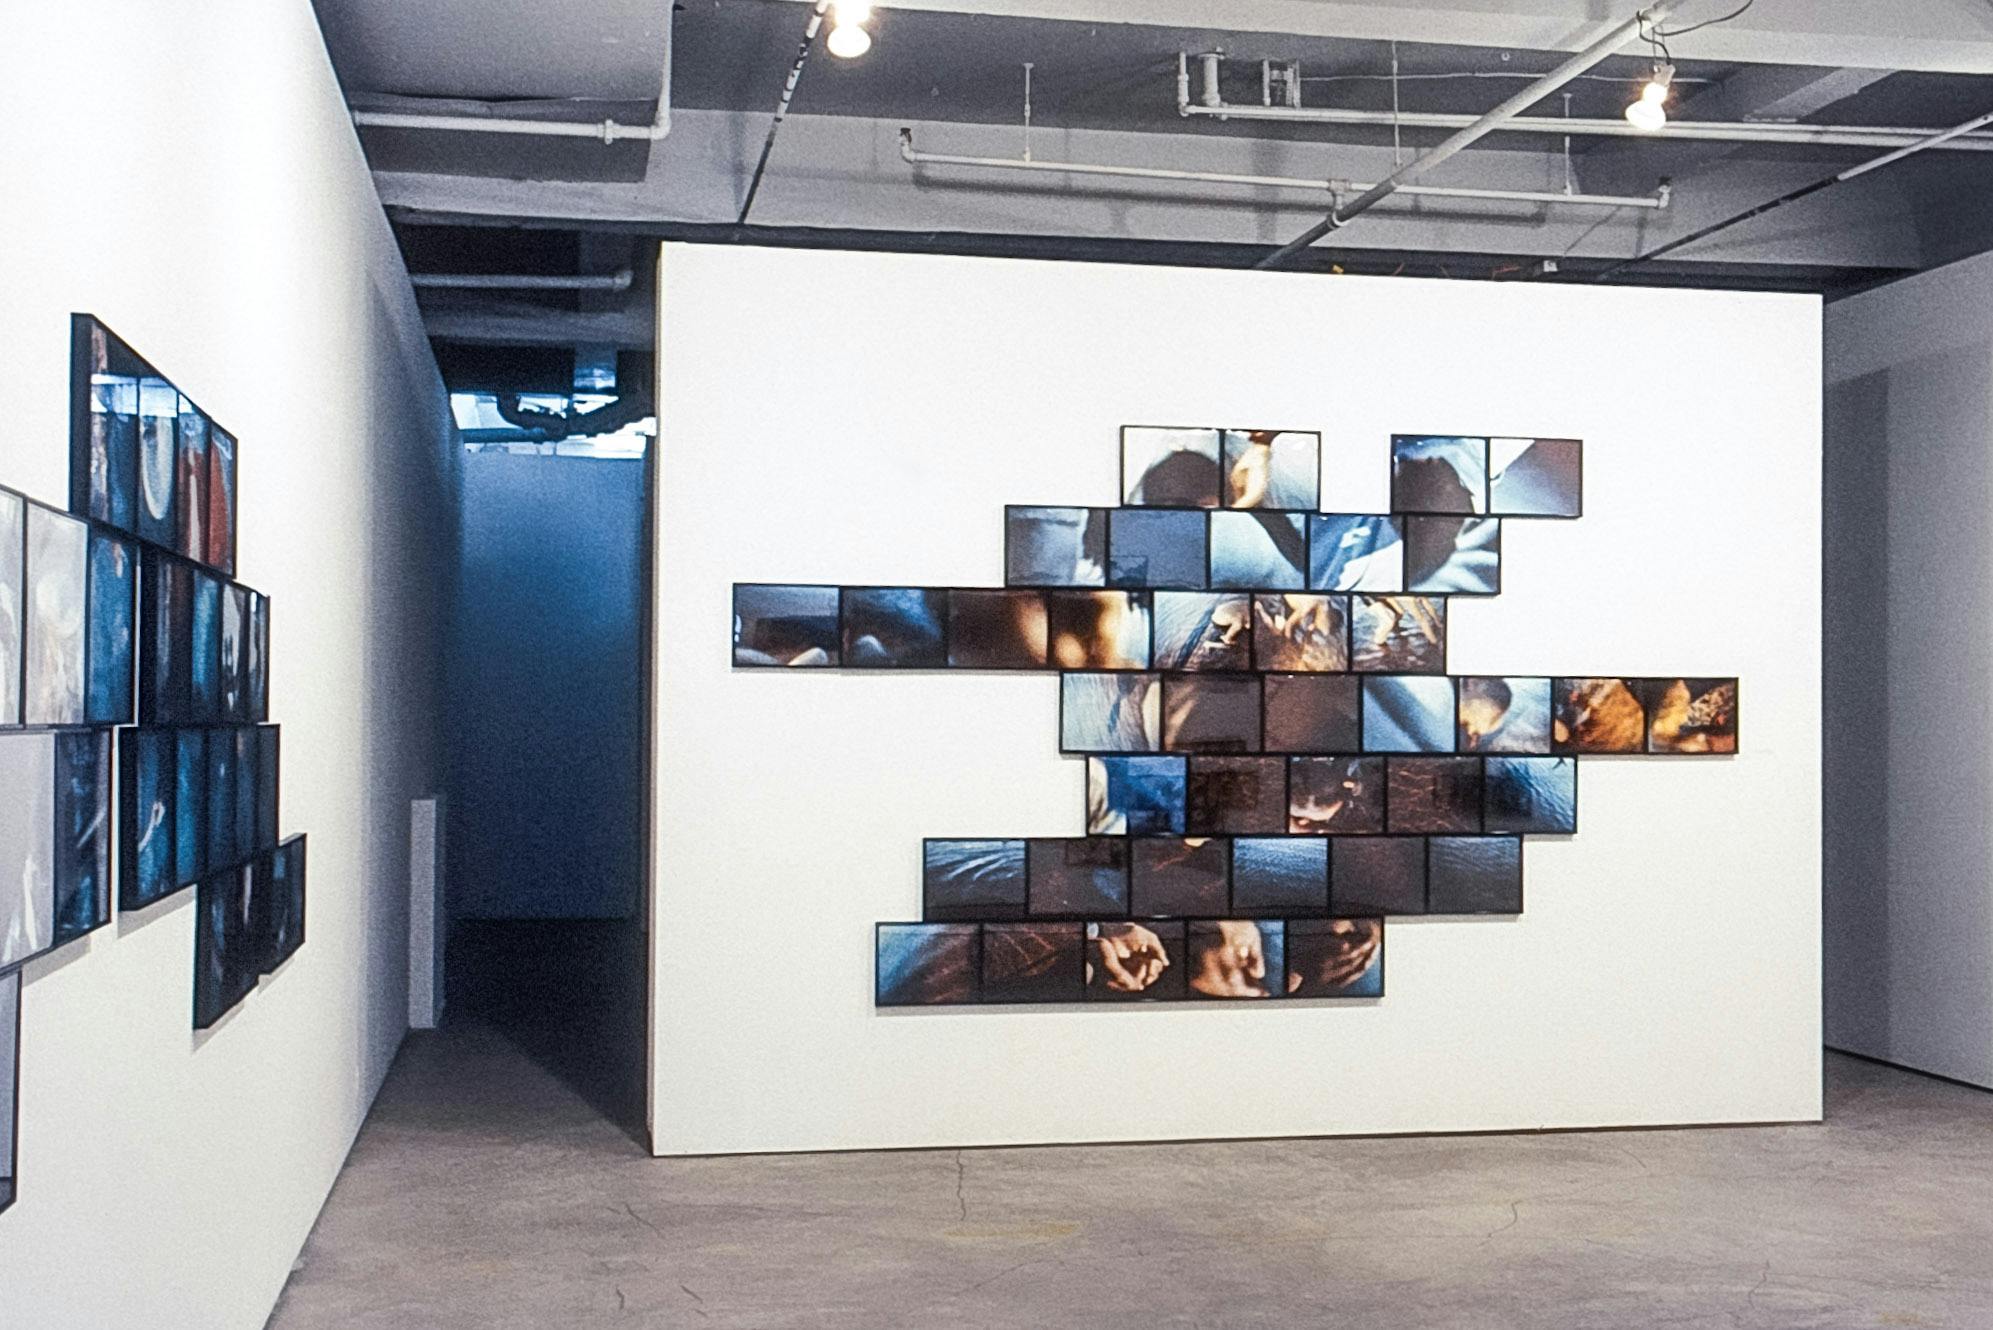 A gallery with a wall in the centre creating a division. This wall shows several photos of snippets of ripples on water and hands. The other visible wall has several photos as well, seen at an angle.